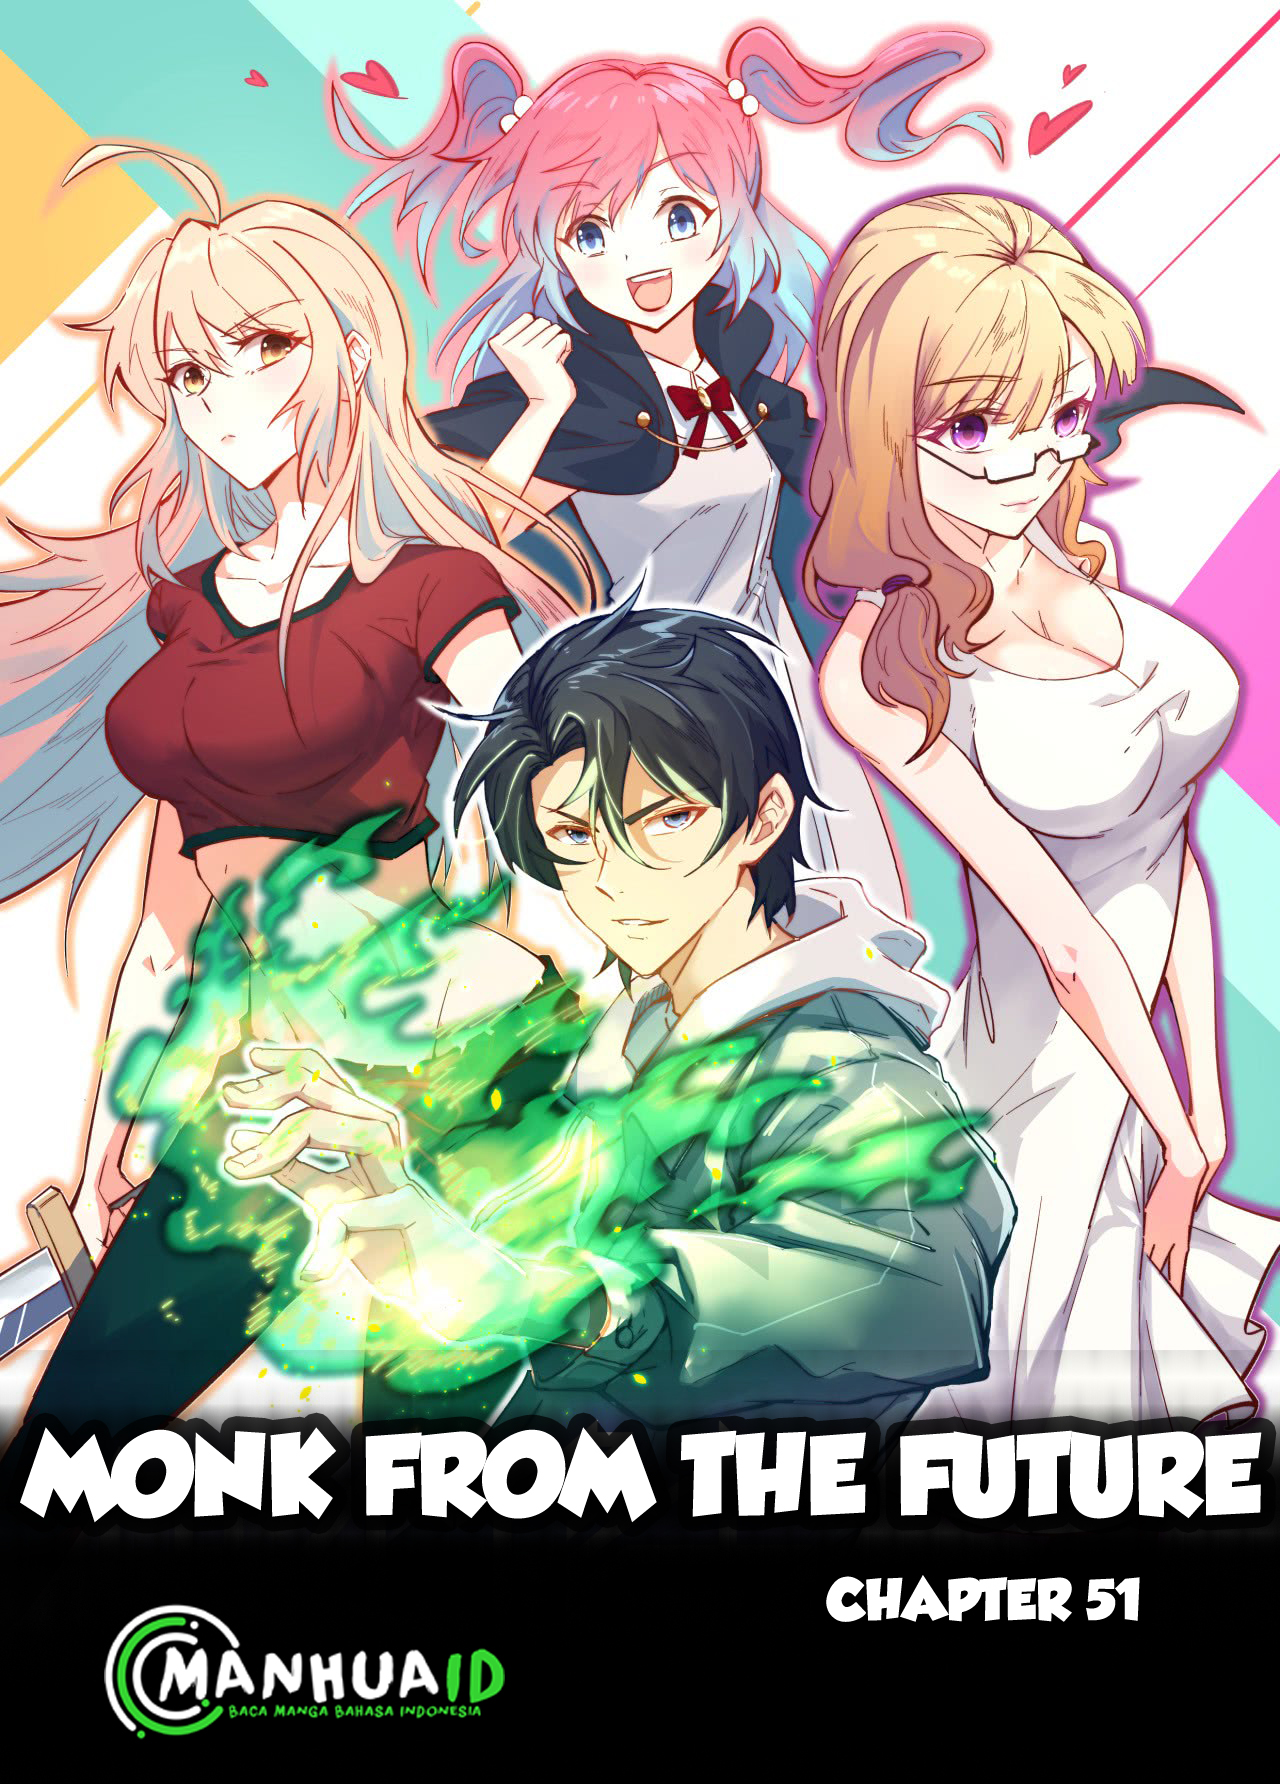 Monk From the Future Chapter 51